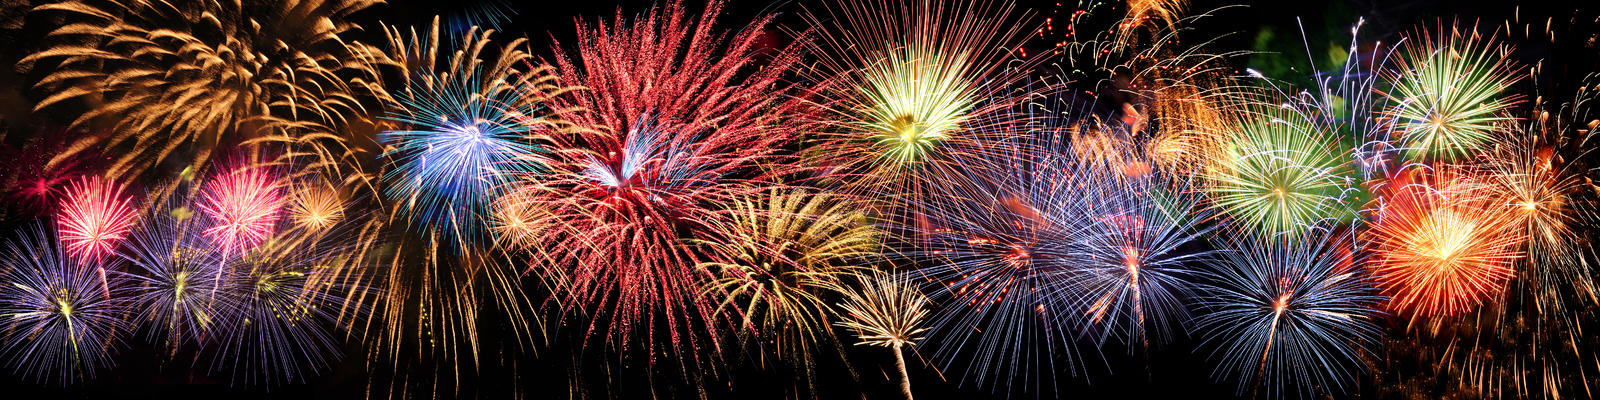 4th Of July Cruise Festivities From Fireworks To Apple Pie Photo Gino Santa Maria Shutterstock